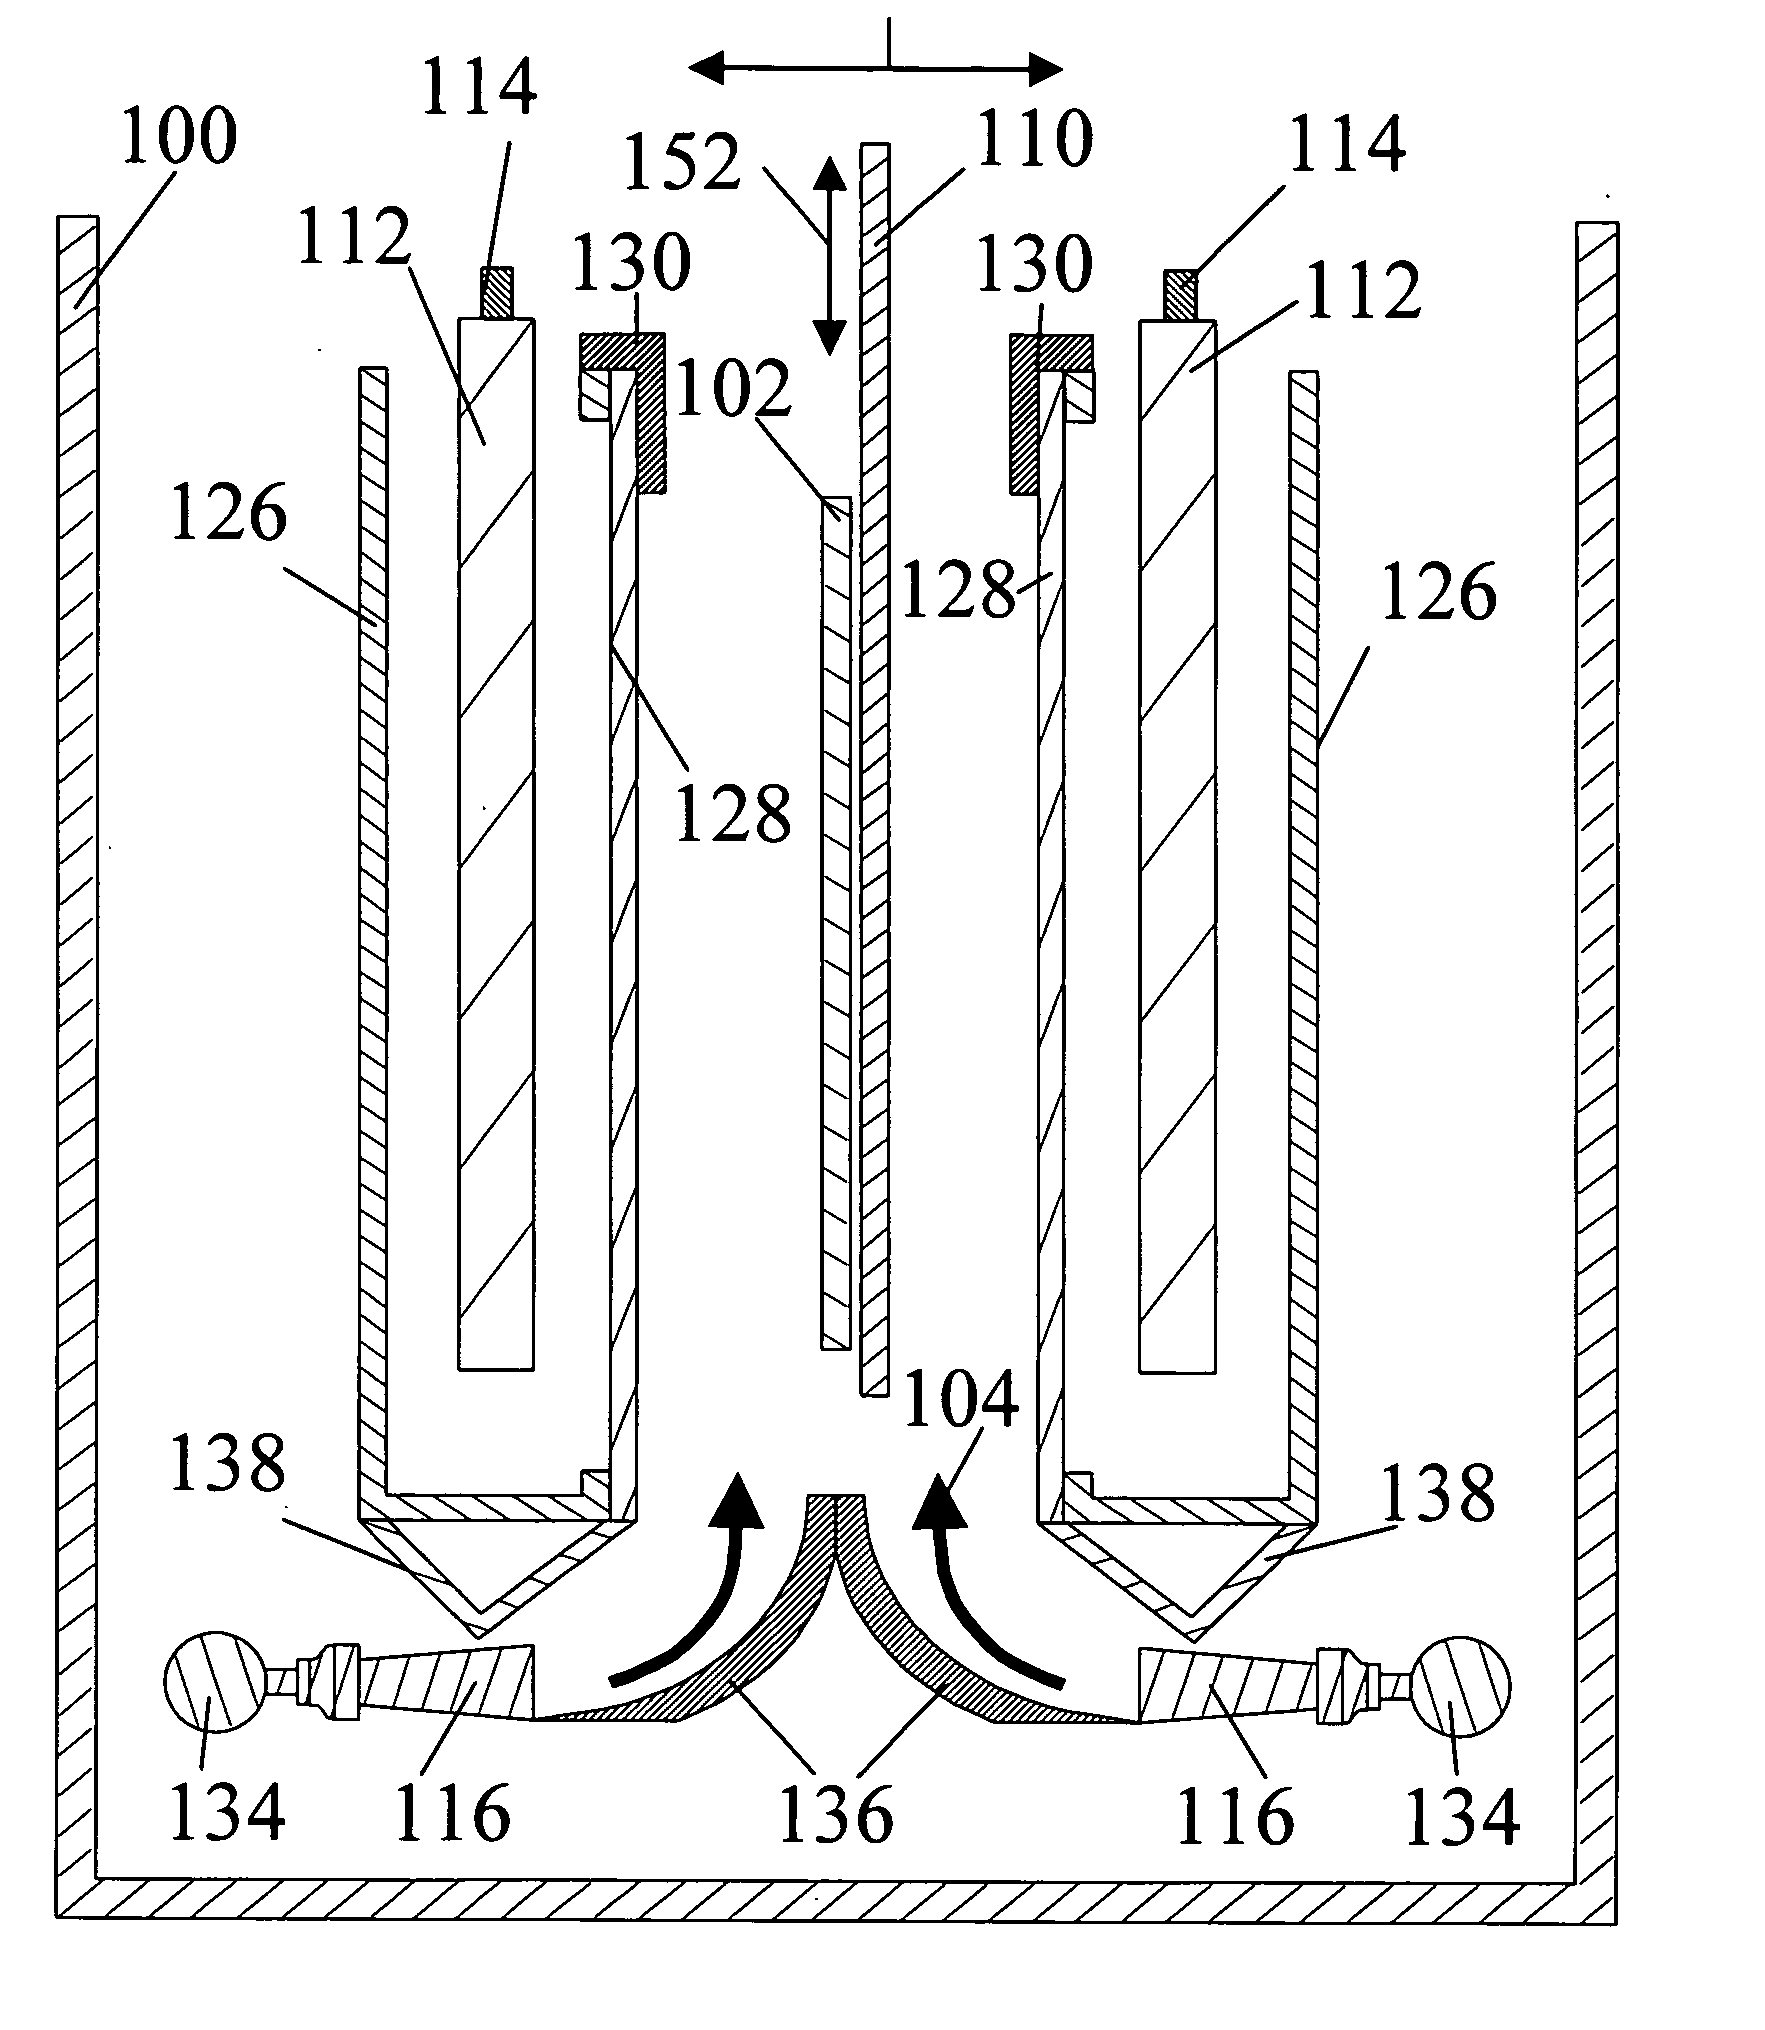 Electroplating cell with hydrodynamics facilitating more uniform deposition across a workpiece during plating